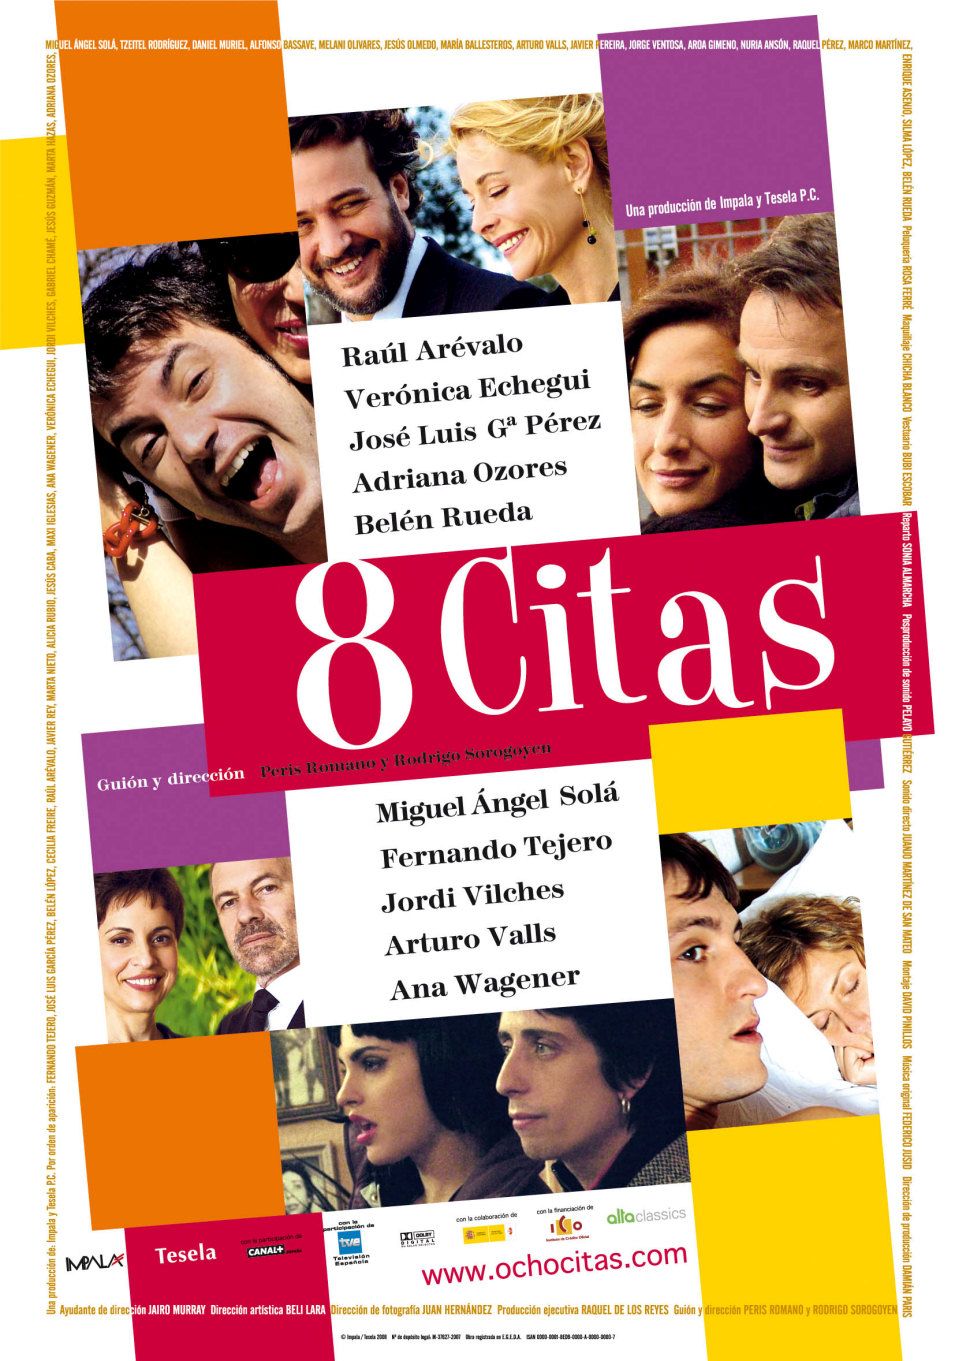 Extra Large Movie Poster Image for 8 citas 